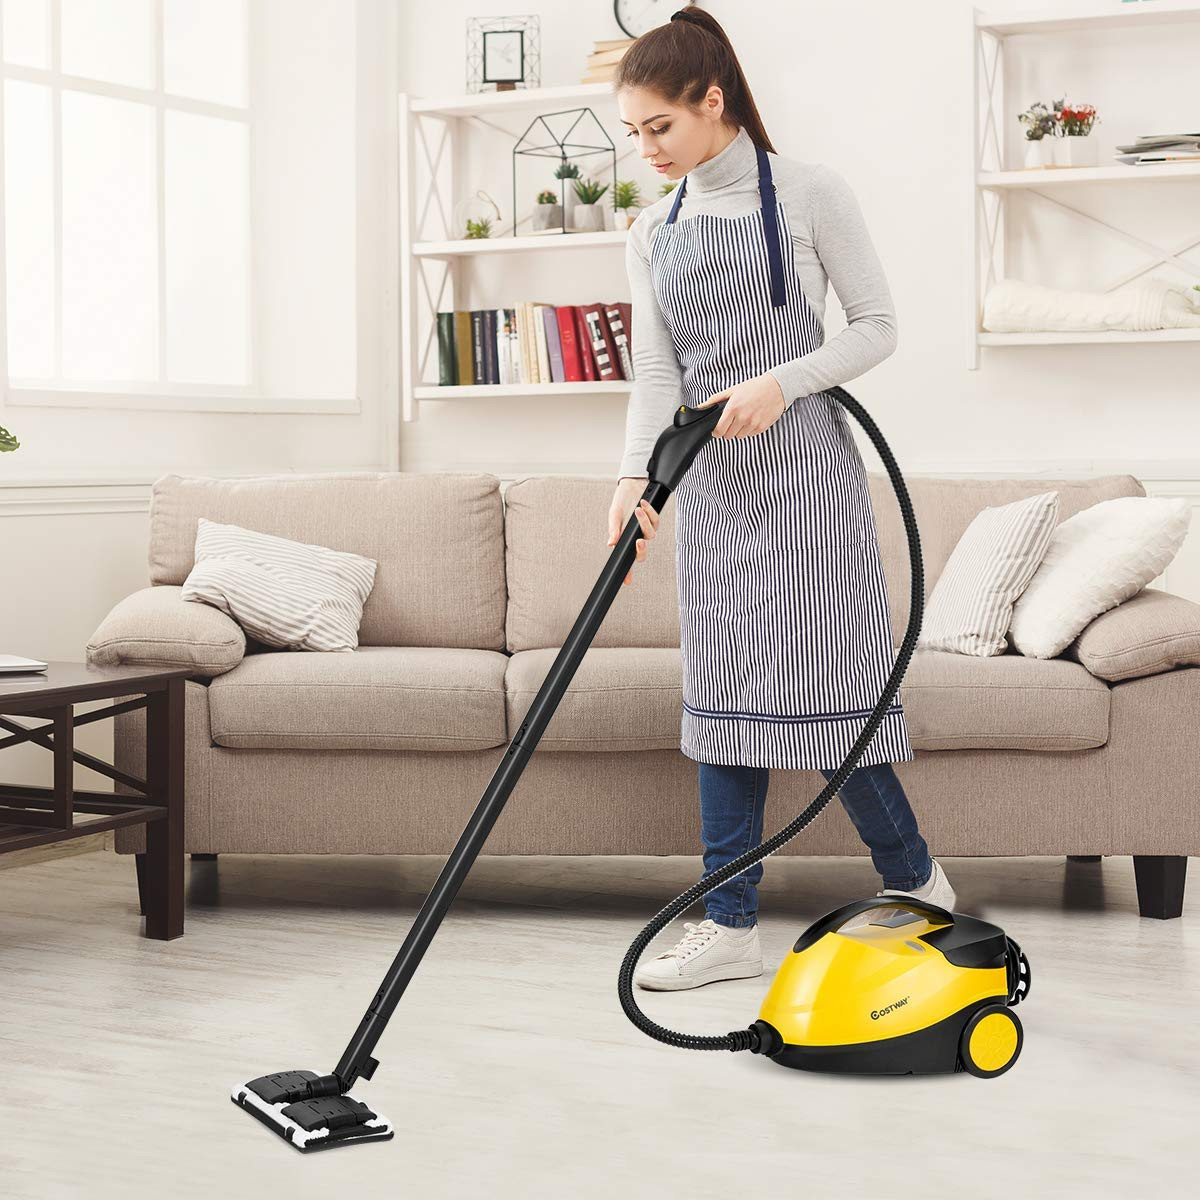 hardwood floor steam cleaner amazon of amazon com costway steam cleaner all natural chemical free pertaining to amazon com costway steam cleaner all natural chemical free adjustable multi purpose household heavy duty professional steam cleaner included 14